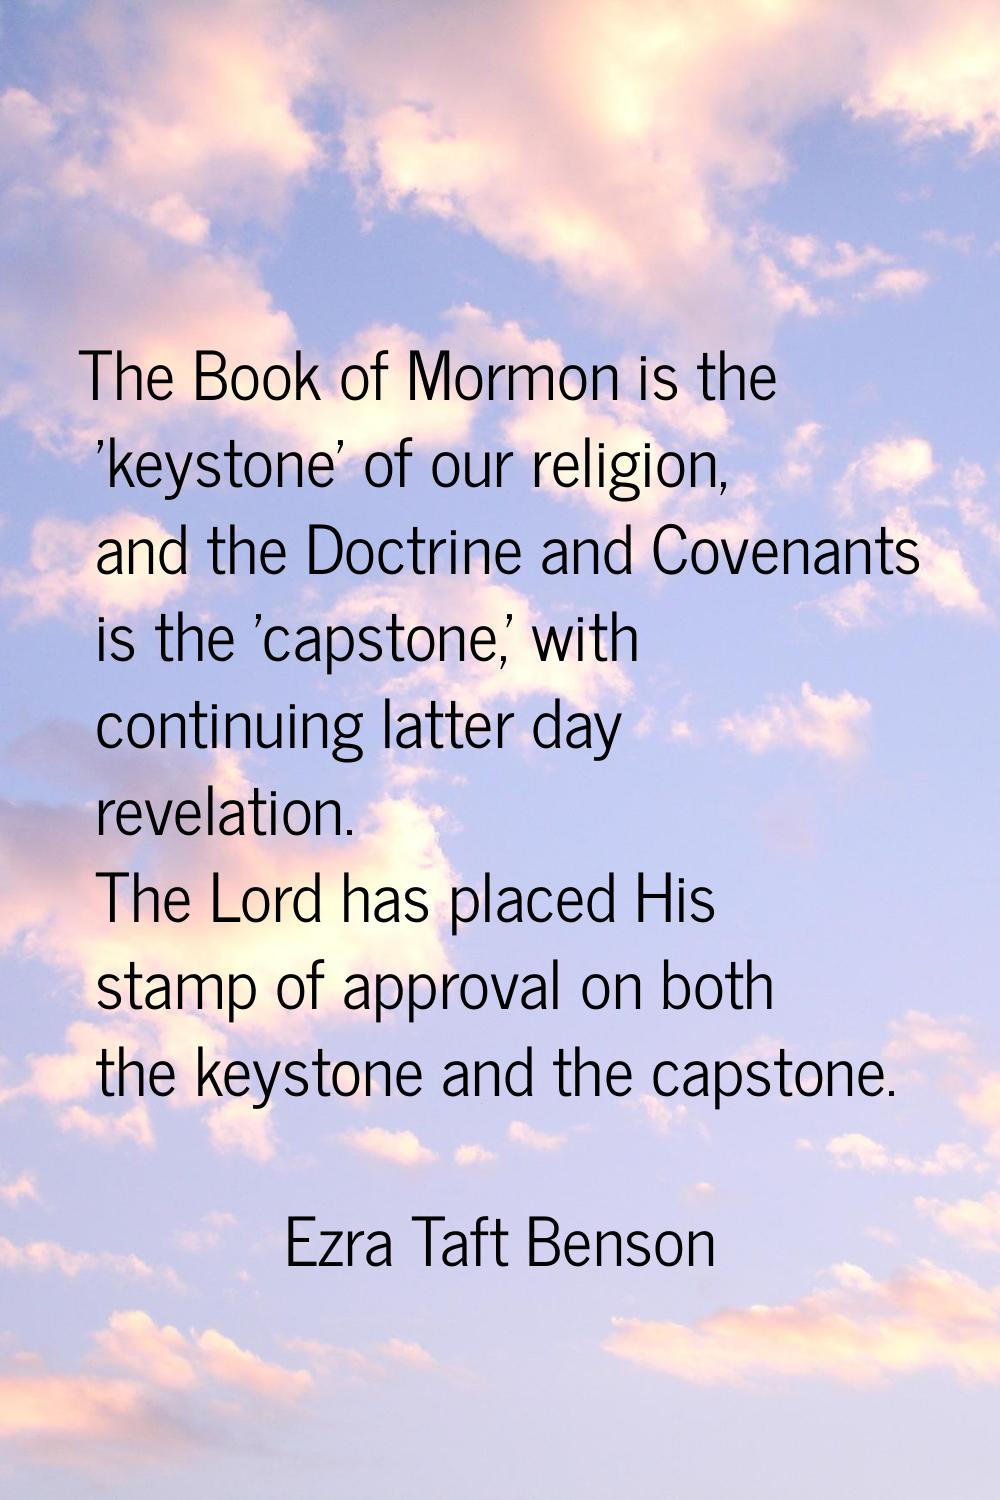 The Book of Mormon is the 'keystone' of our religion, and the Doctrine and Covenants is the 'capsto